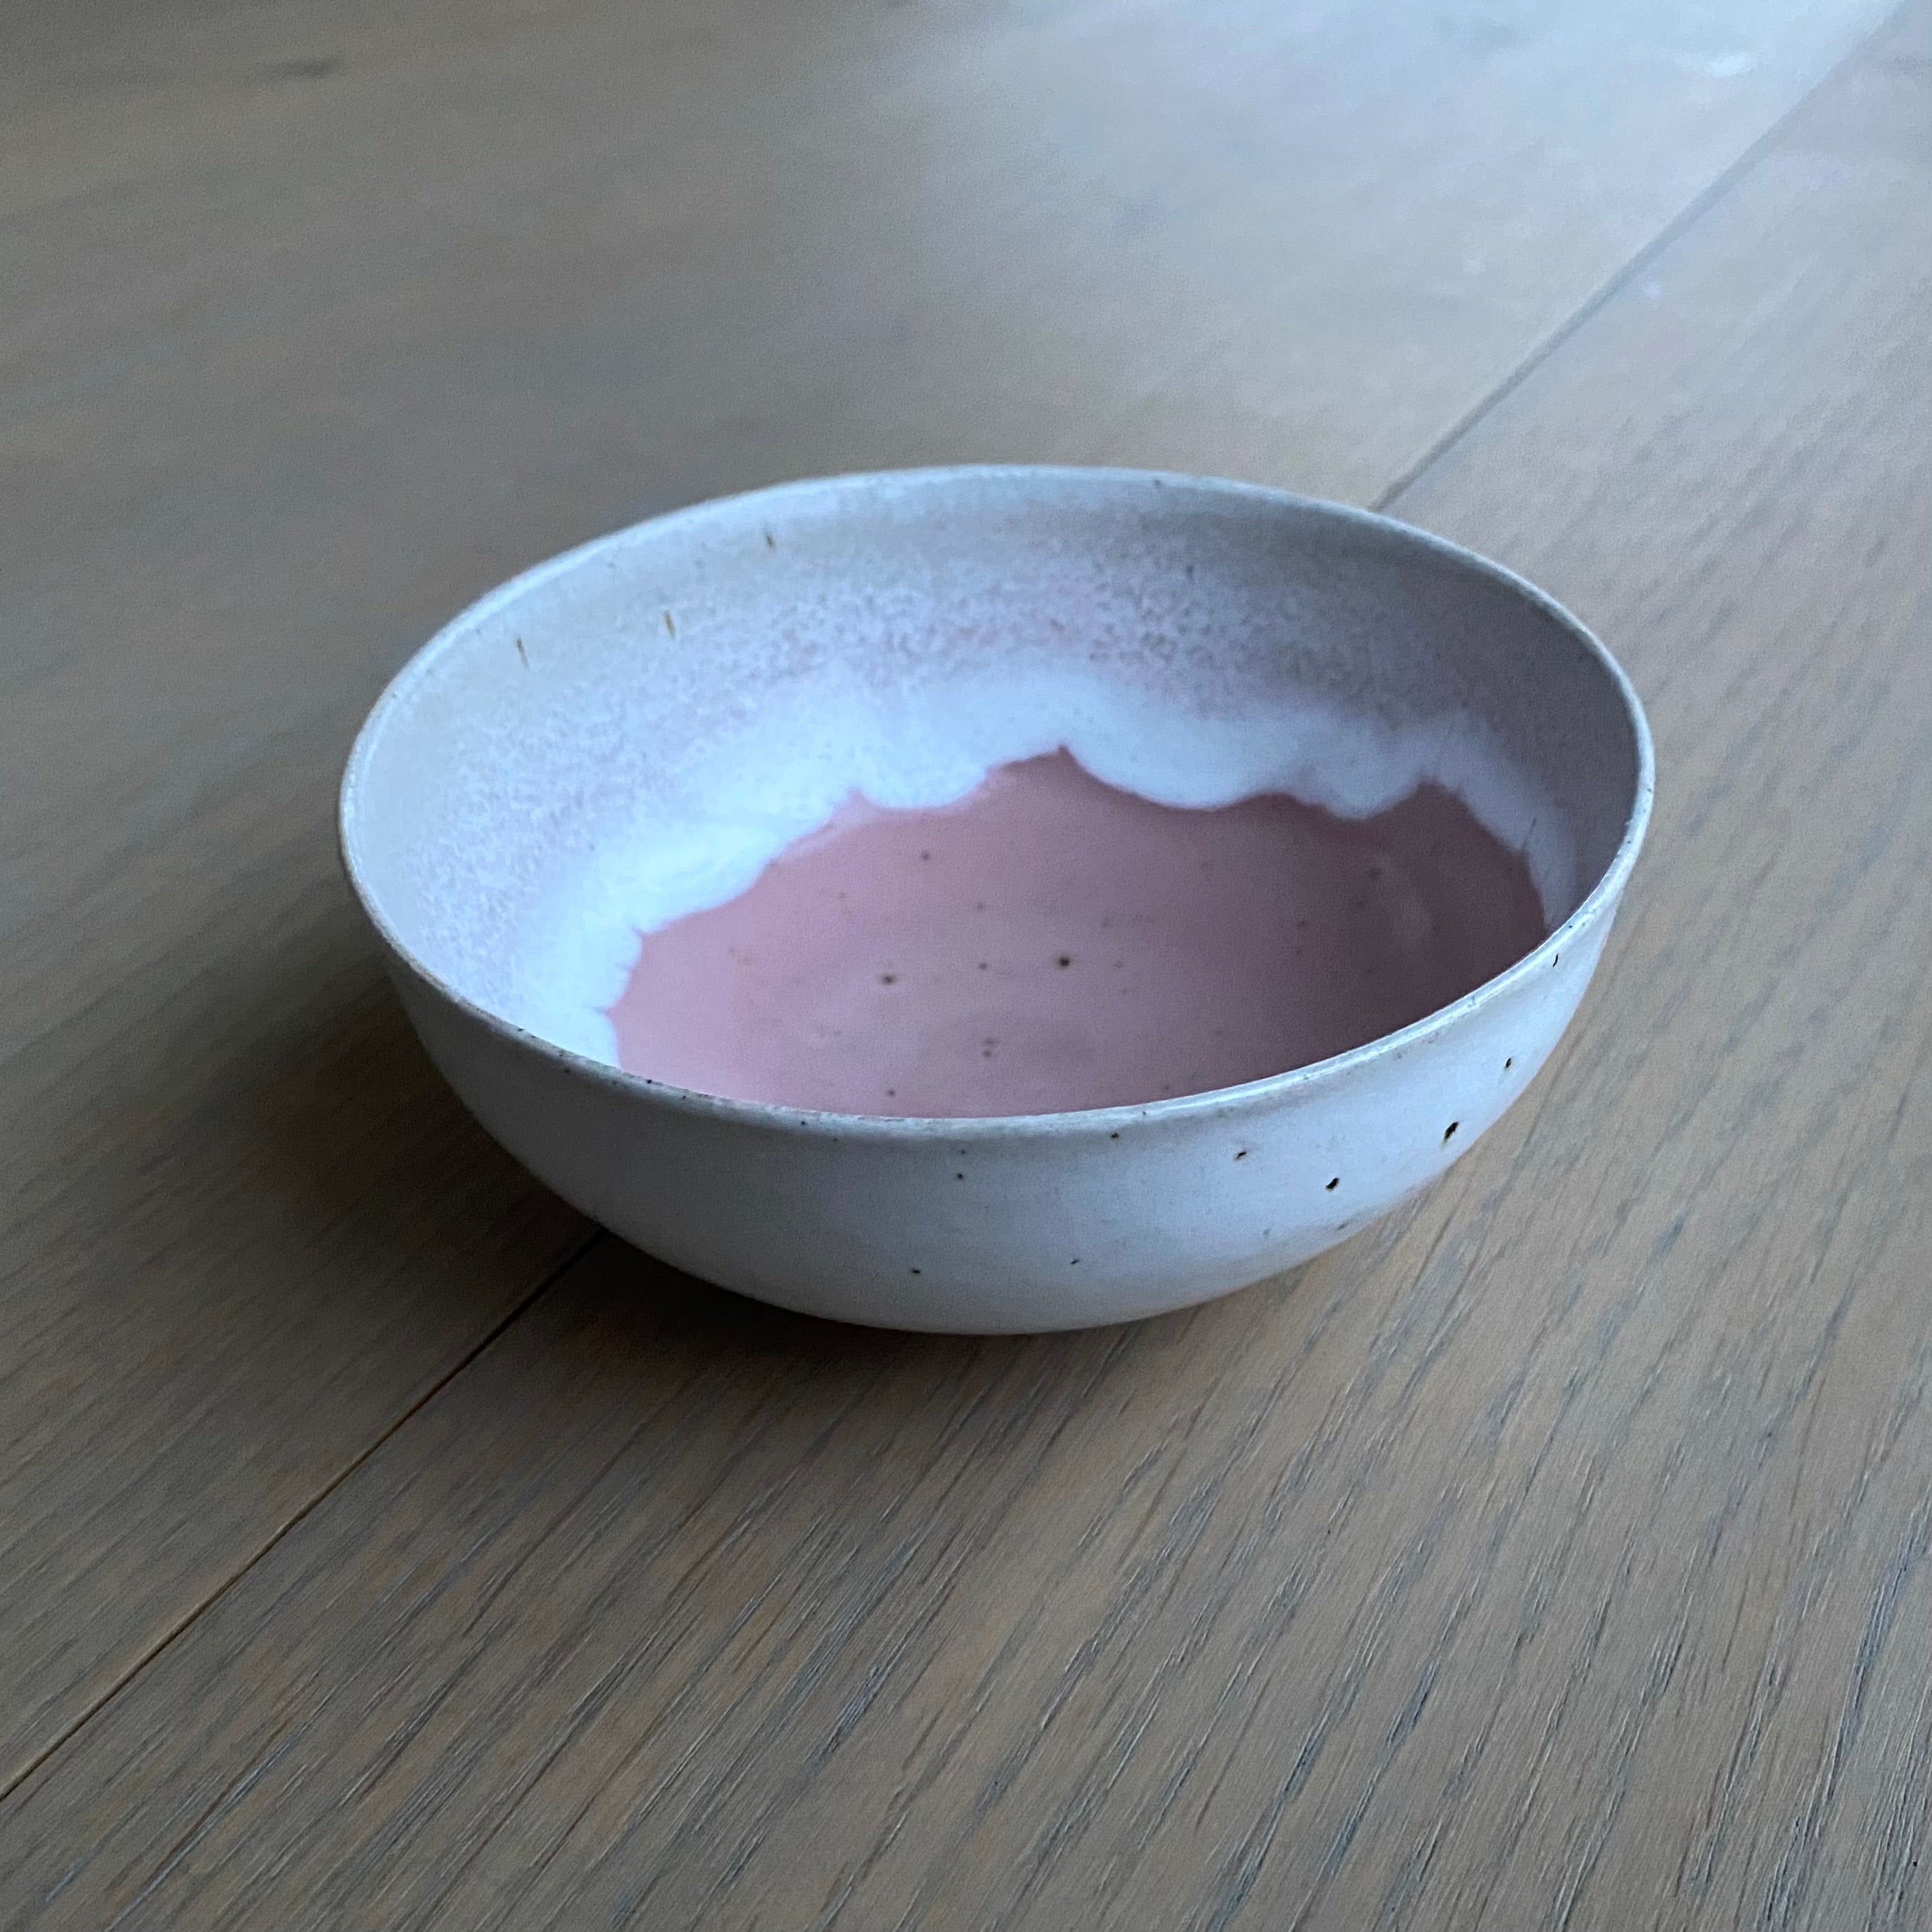 Tasja P small breakfast bowl - off white and pink